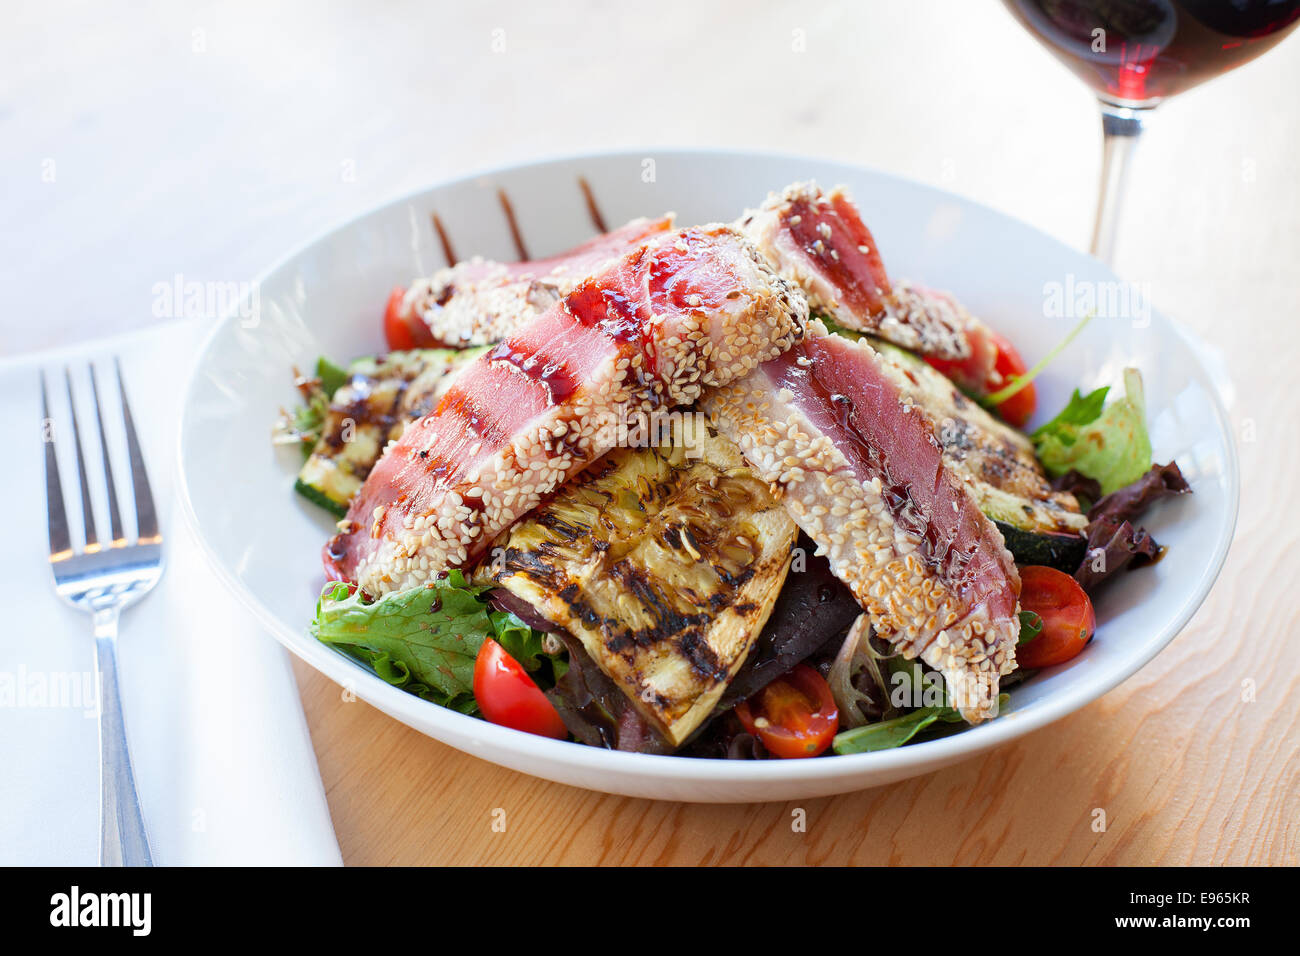 Seared Ahi Tuna salad with grilled vegetables and red wine Stock Photo